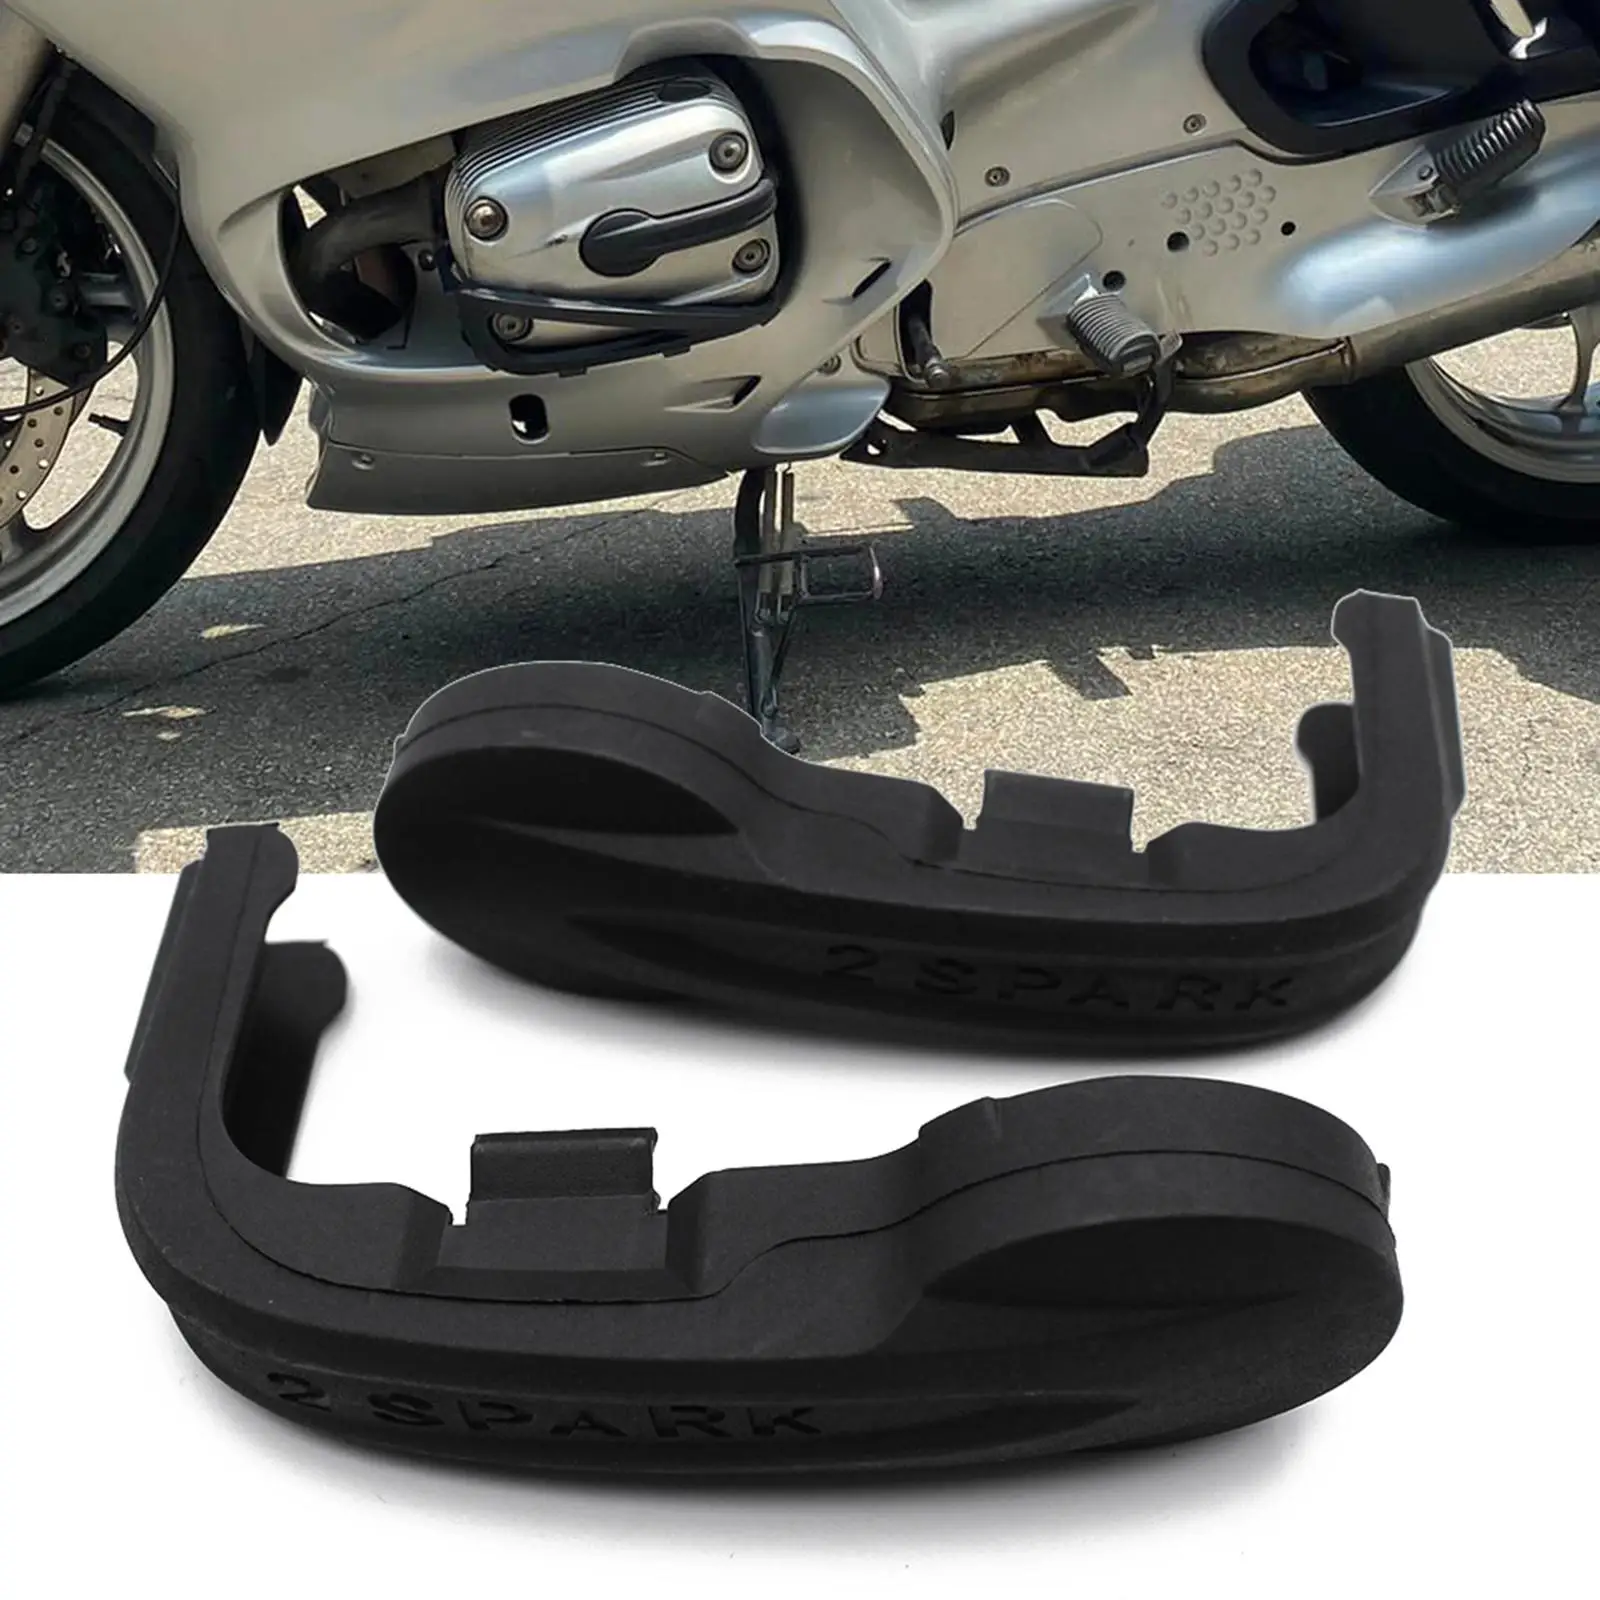 2x Motorcycle Ignition Spark Plug Cover Easy Installation for BMW R1150RS R1150 R RT GS RS R1150GS Motorbike Accessories